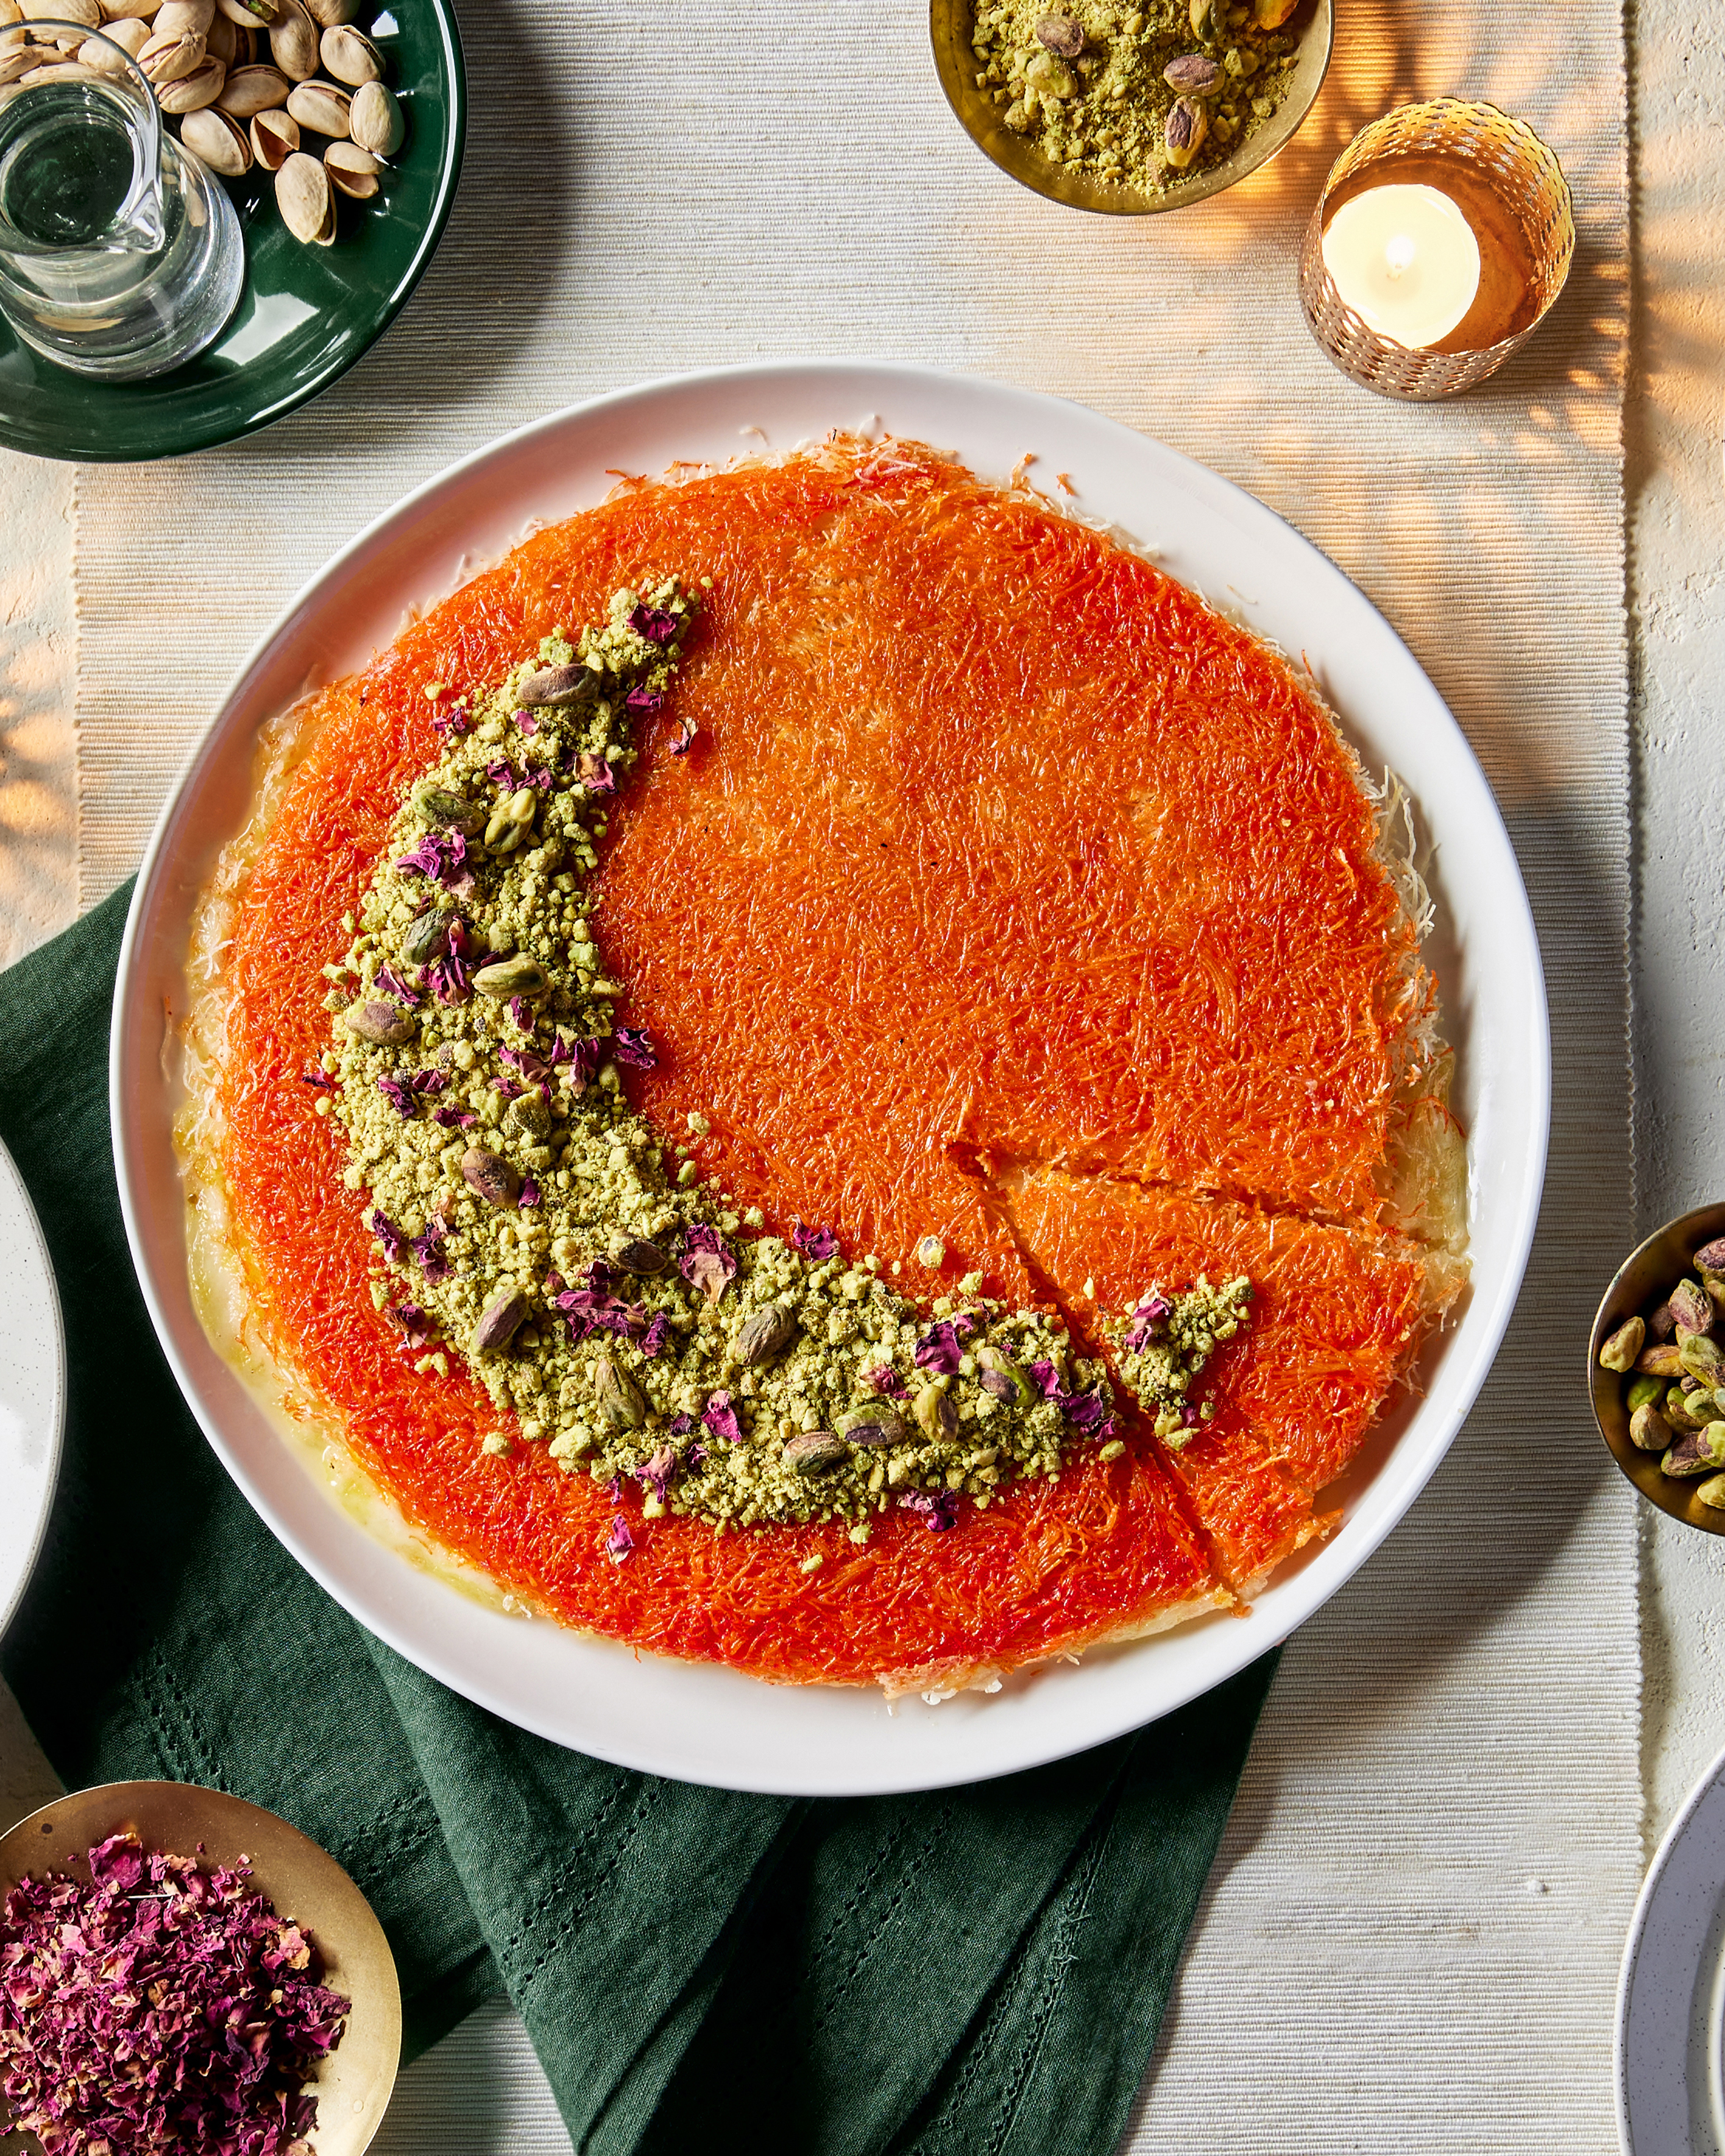 Knafeh on a plate with one slice cut but not removed, garnished with pistachios and flower petals arranged in a crescent moon shape, shown with dishes of pistachios in the shell and flower petals and a lit candle. 